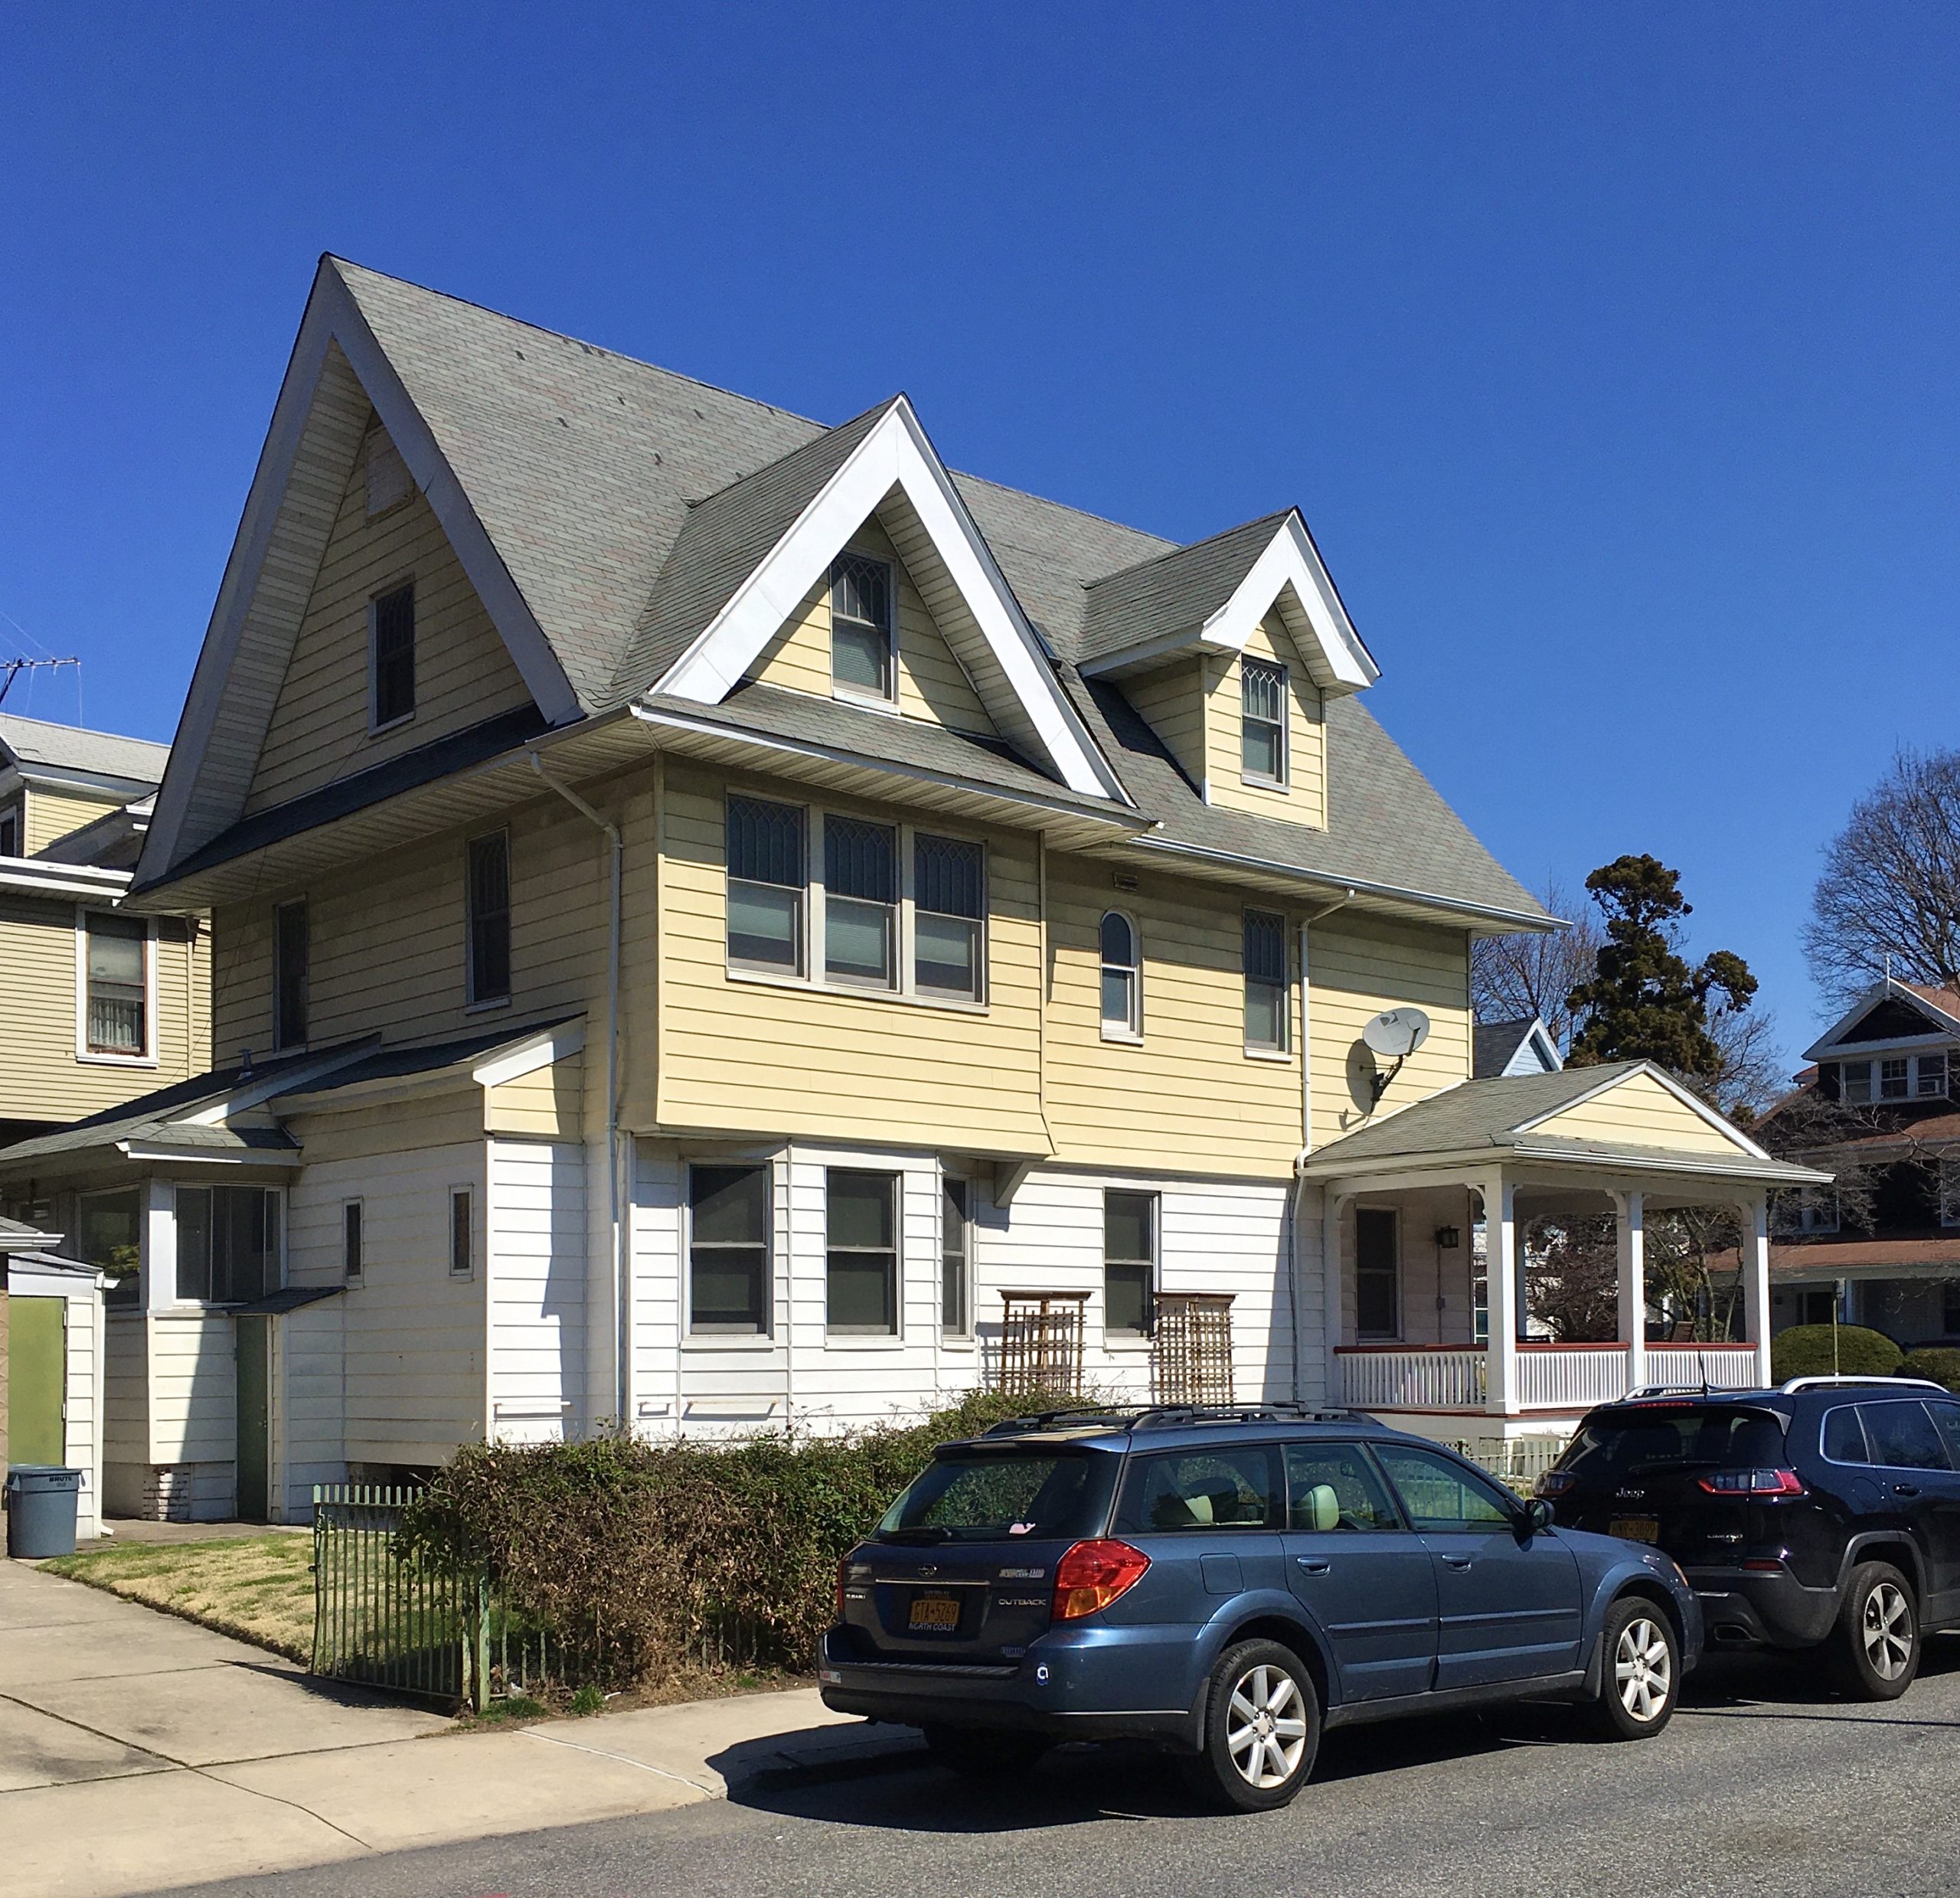 The handsome house on this corner is 160 Stratford Road. Photo: Lore Croghan/Brooklyn Eagle